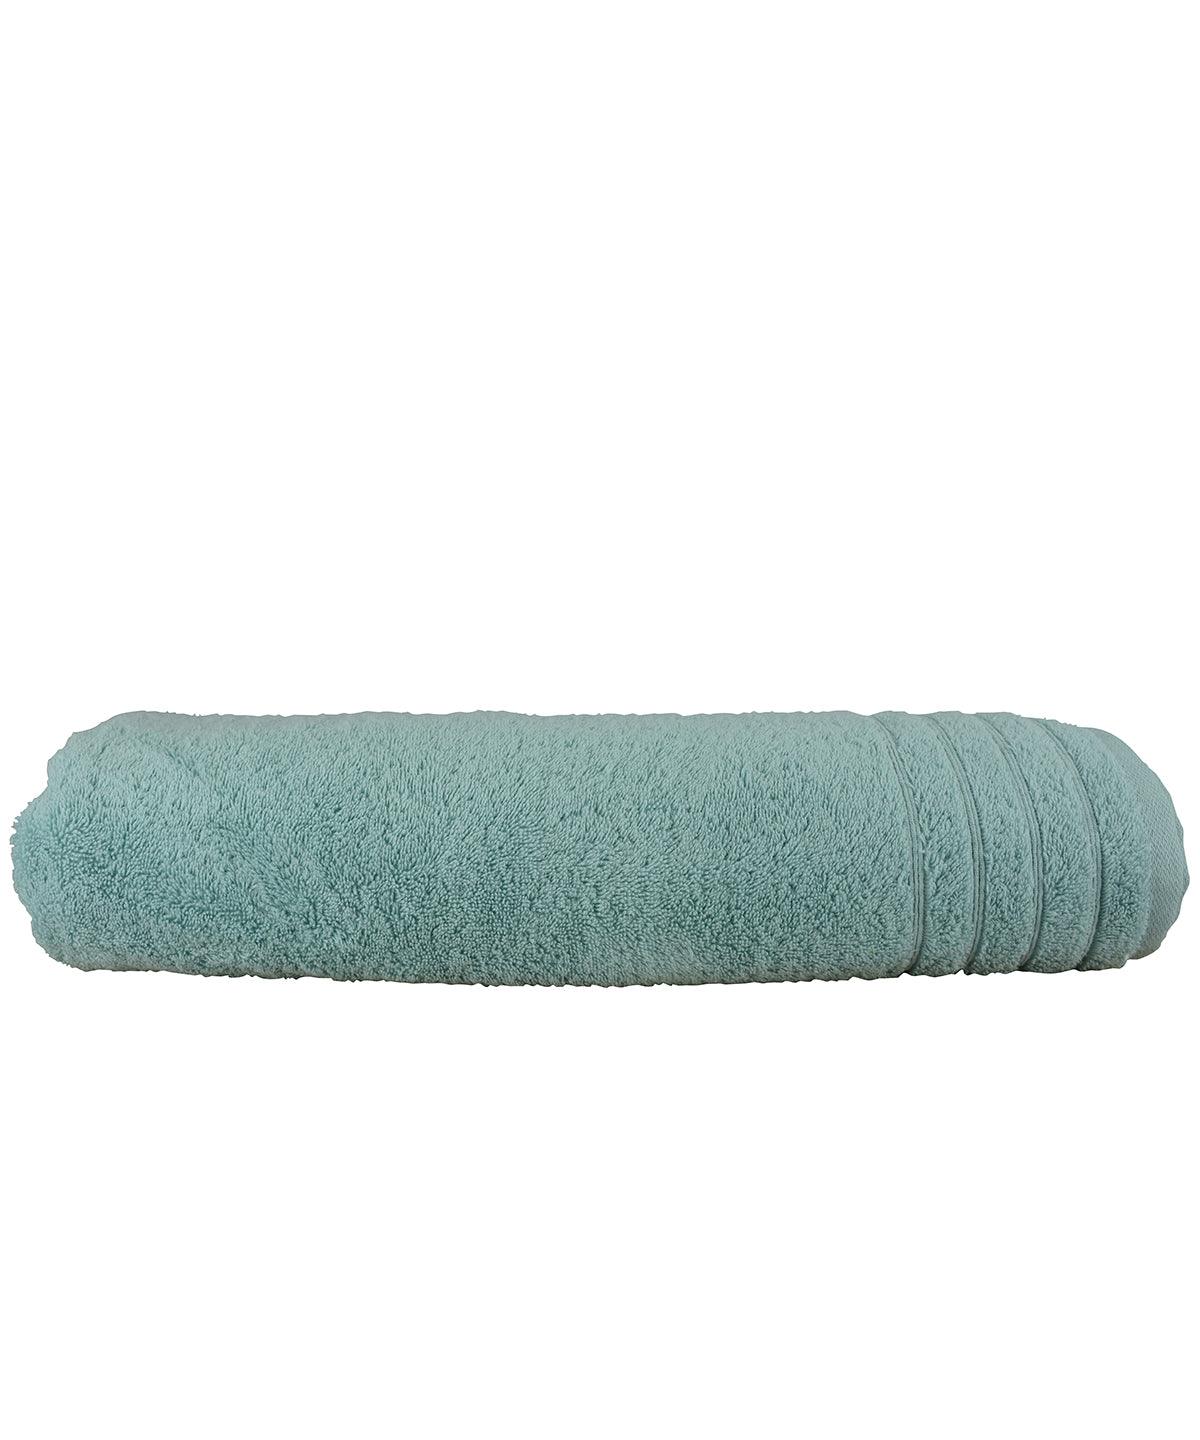 Green - ARTG® Organic beach towel Towels A&R Towels Gifting & Accessories, Holiday Season, Homewares & Towelling, Must Haves, Organic & Conscious Schoolwear Centres